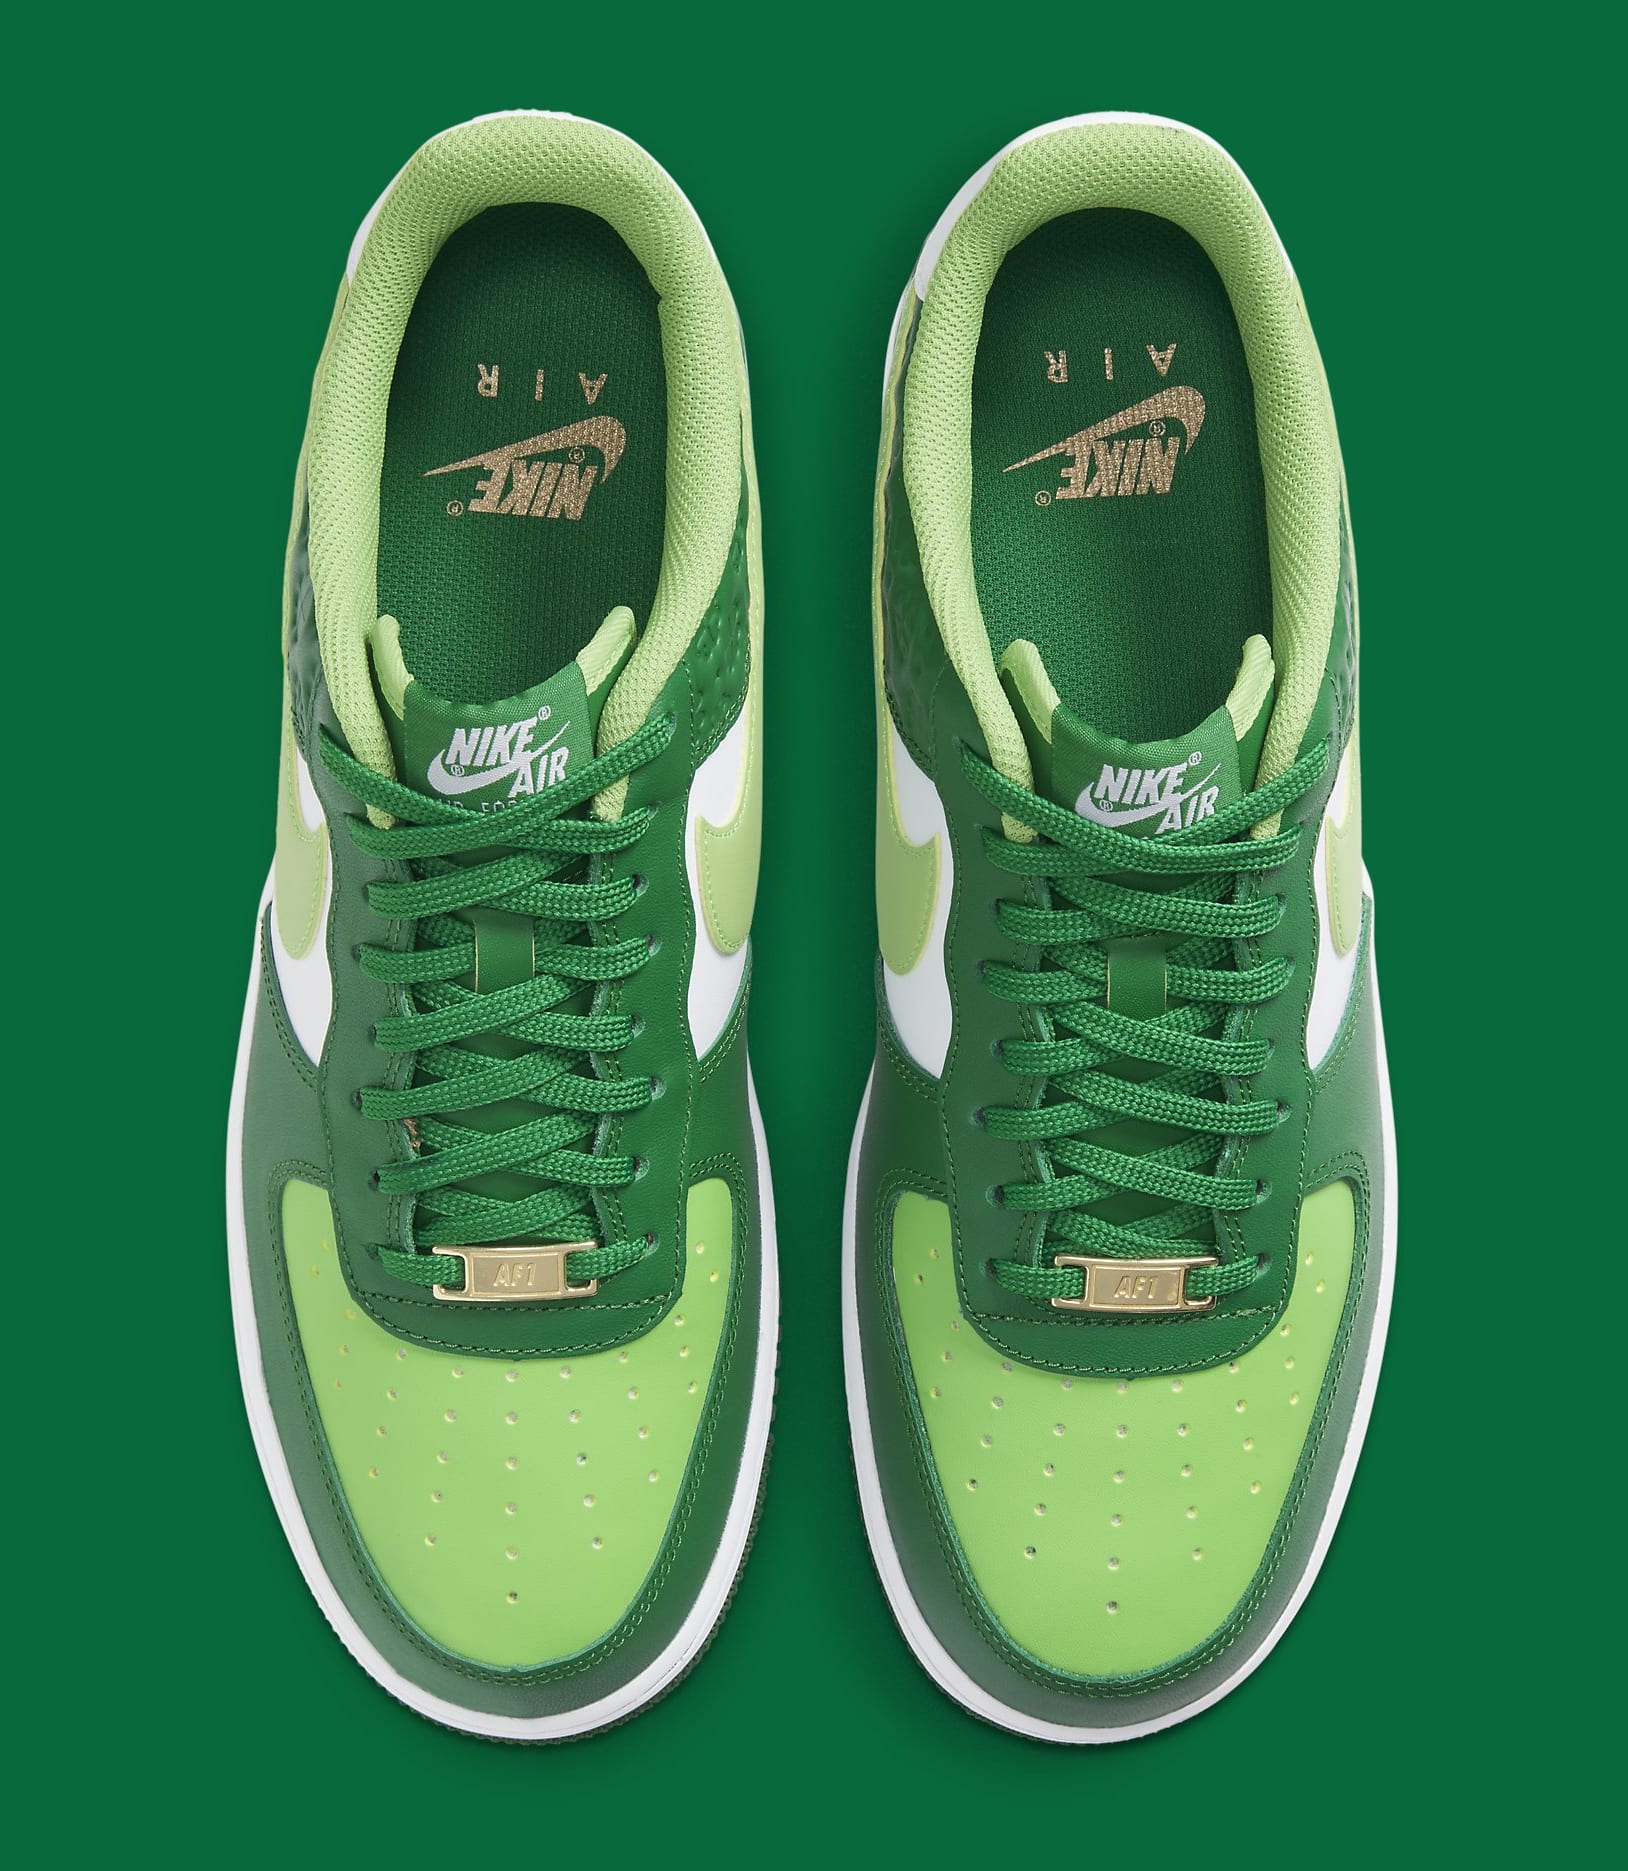 Nike Air Force 1 Low “Malachite” Coming For St. Patrick's Day